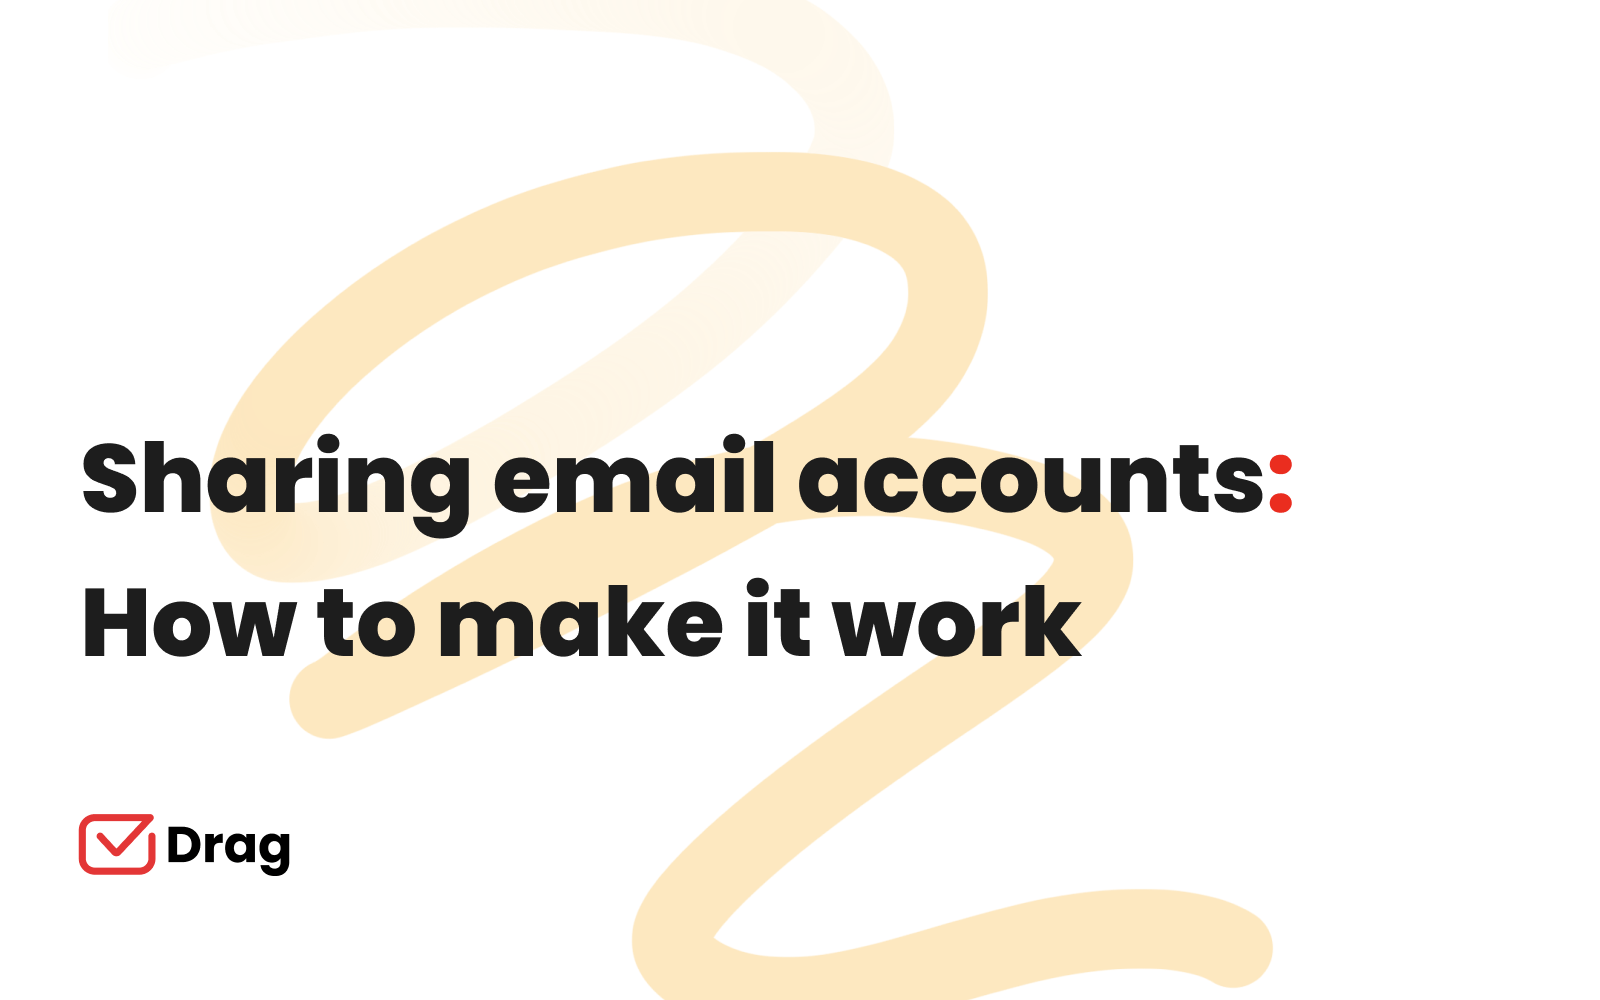 featured image: sharing email accounts: how to make it work